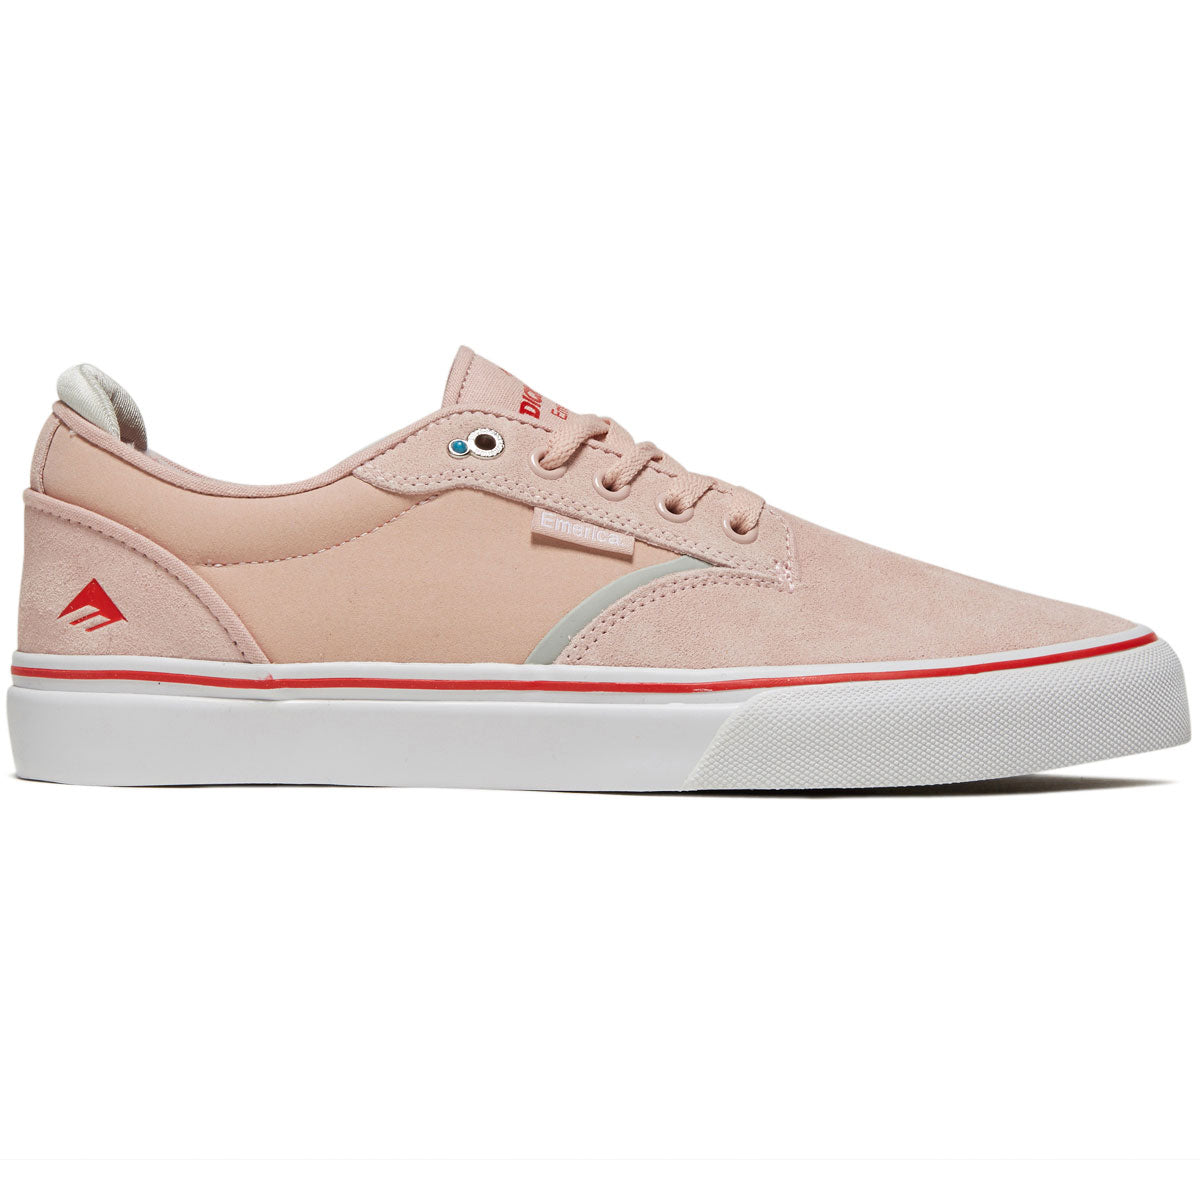 Emerica Dickson Shoes - Pink image 1